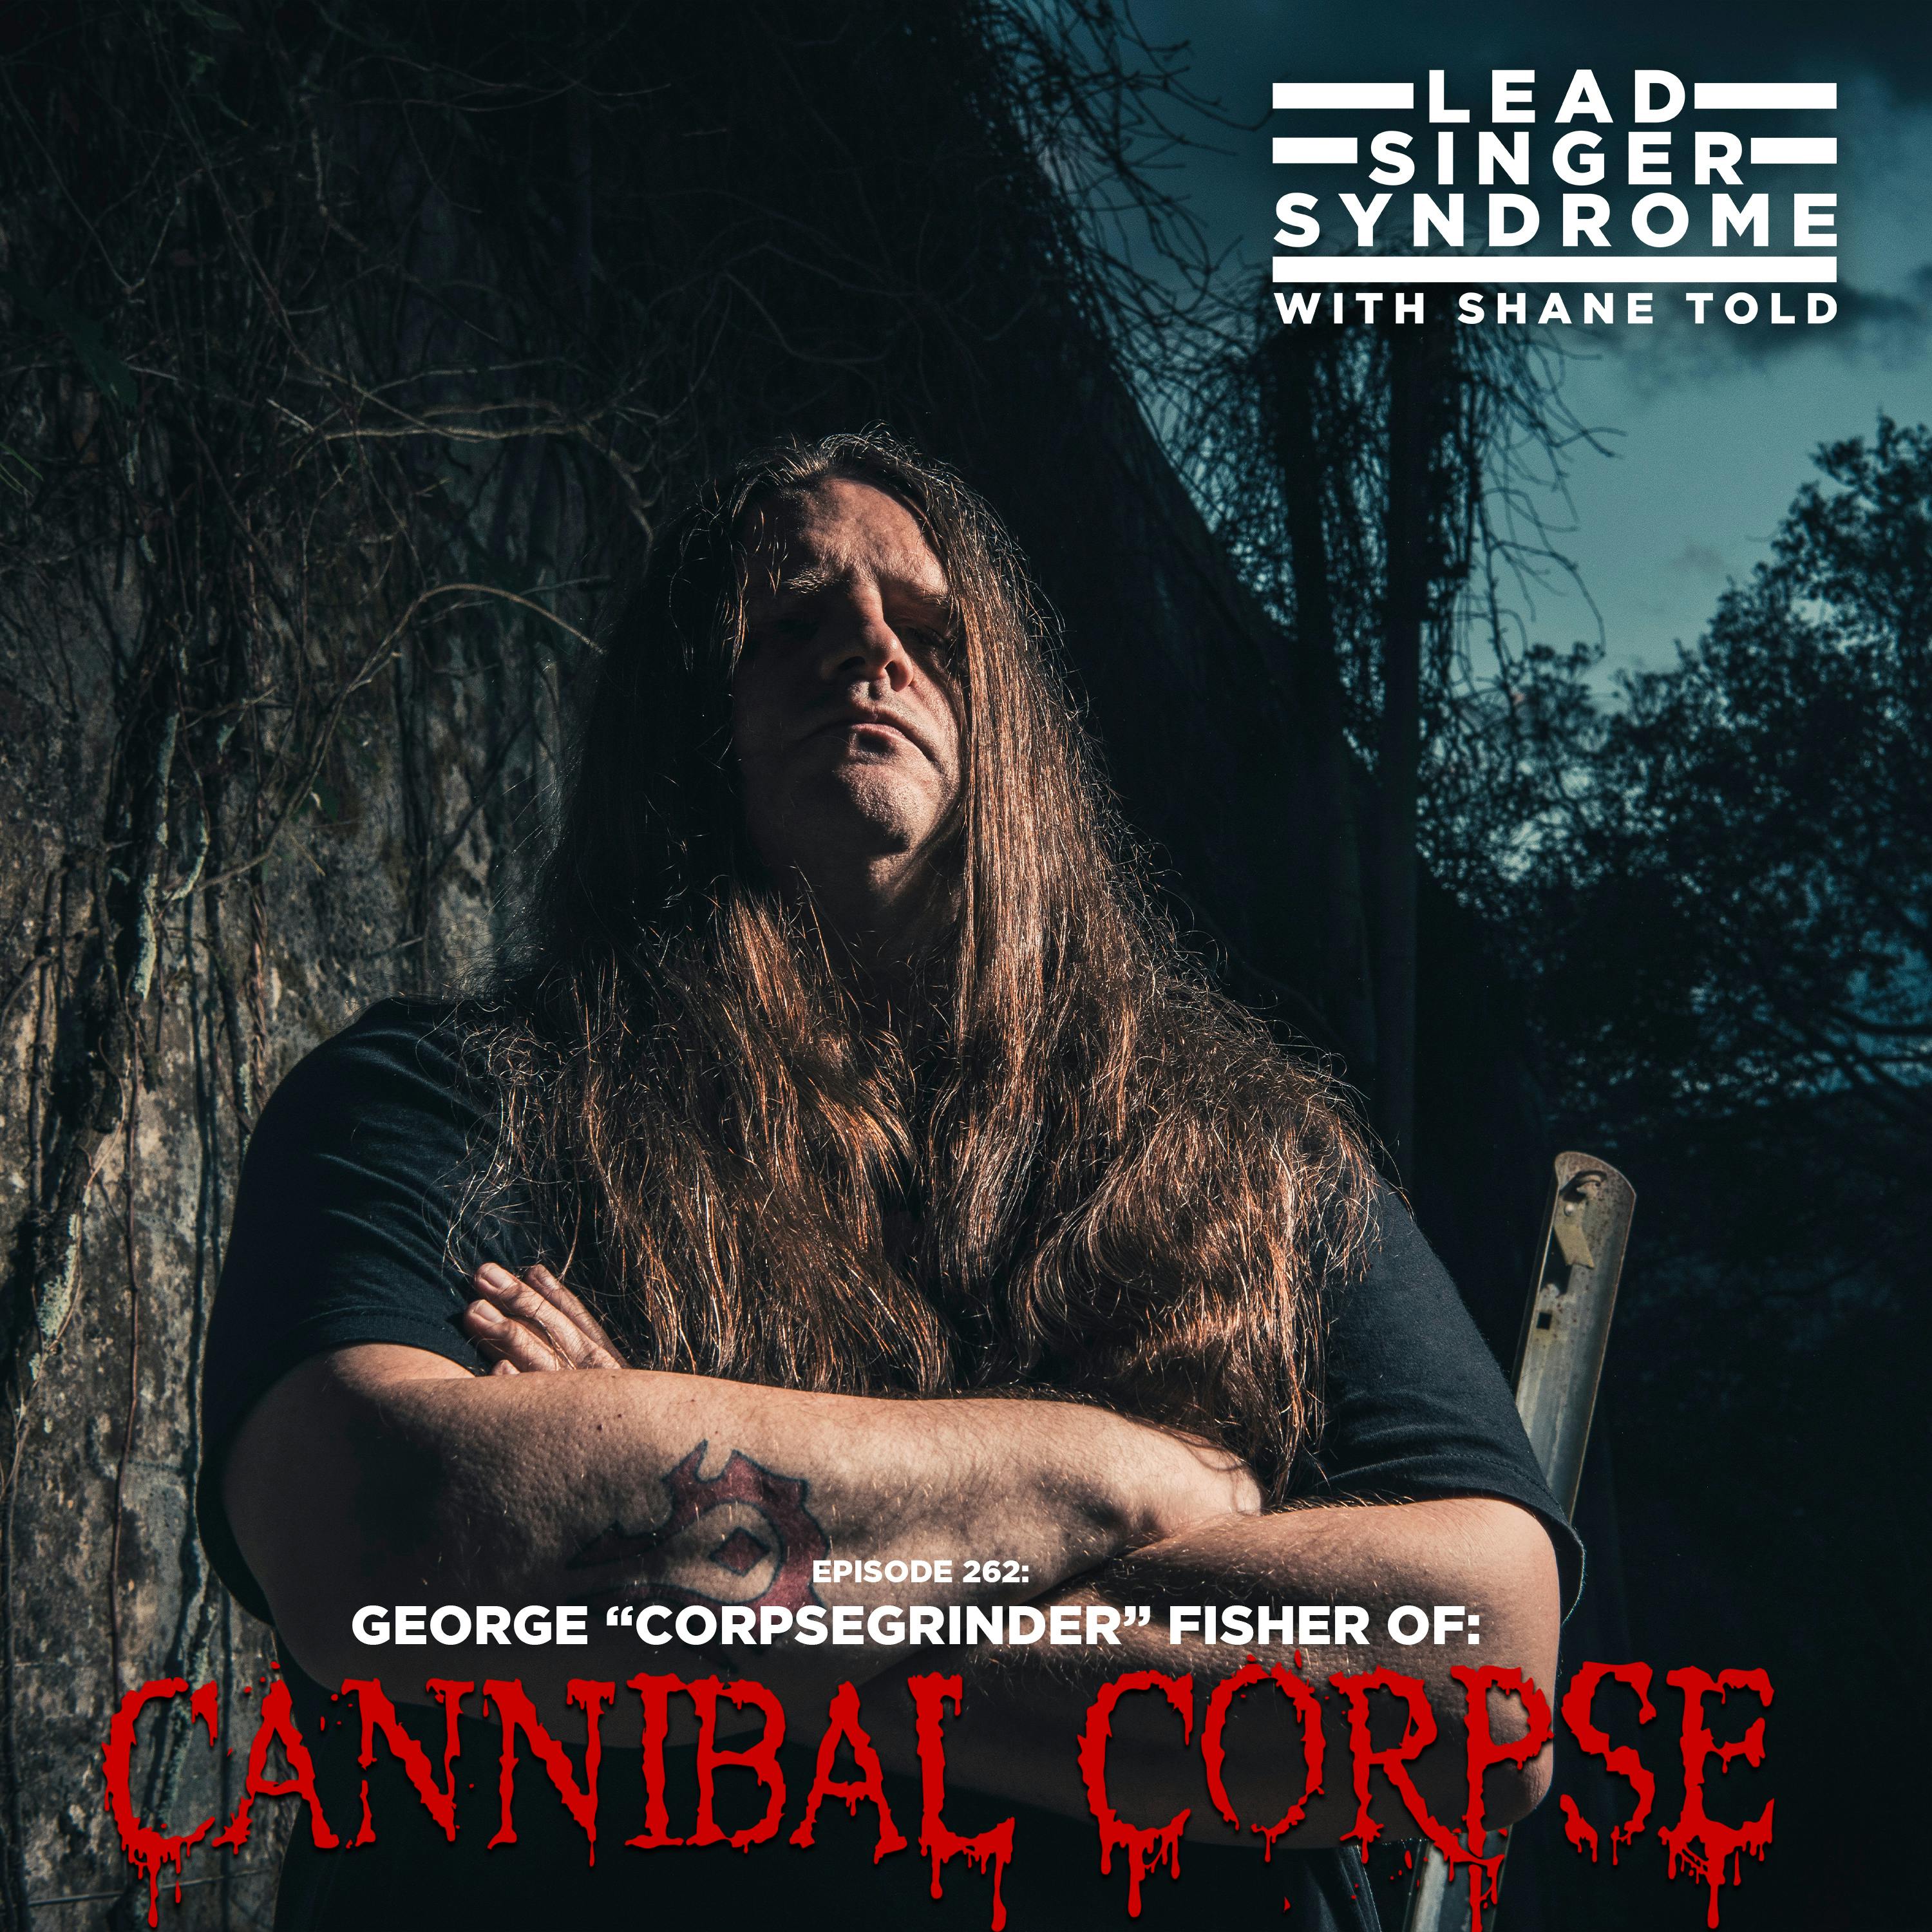 George ”Corpsegrinder” Fisher (Cannibal Corpse)